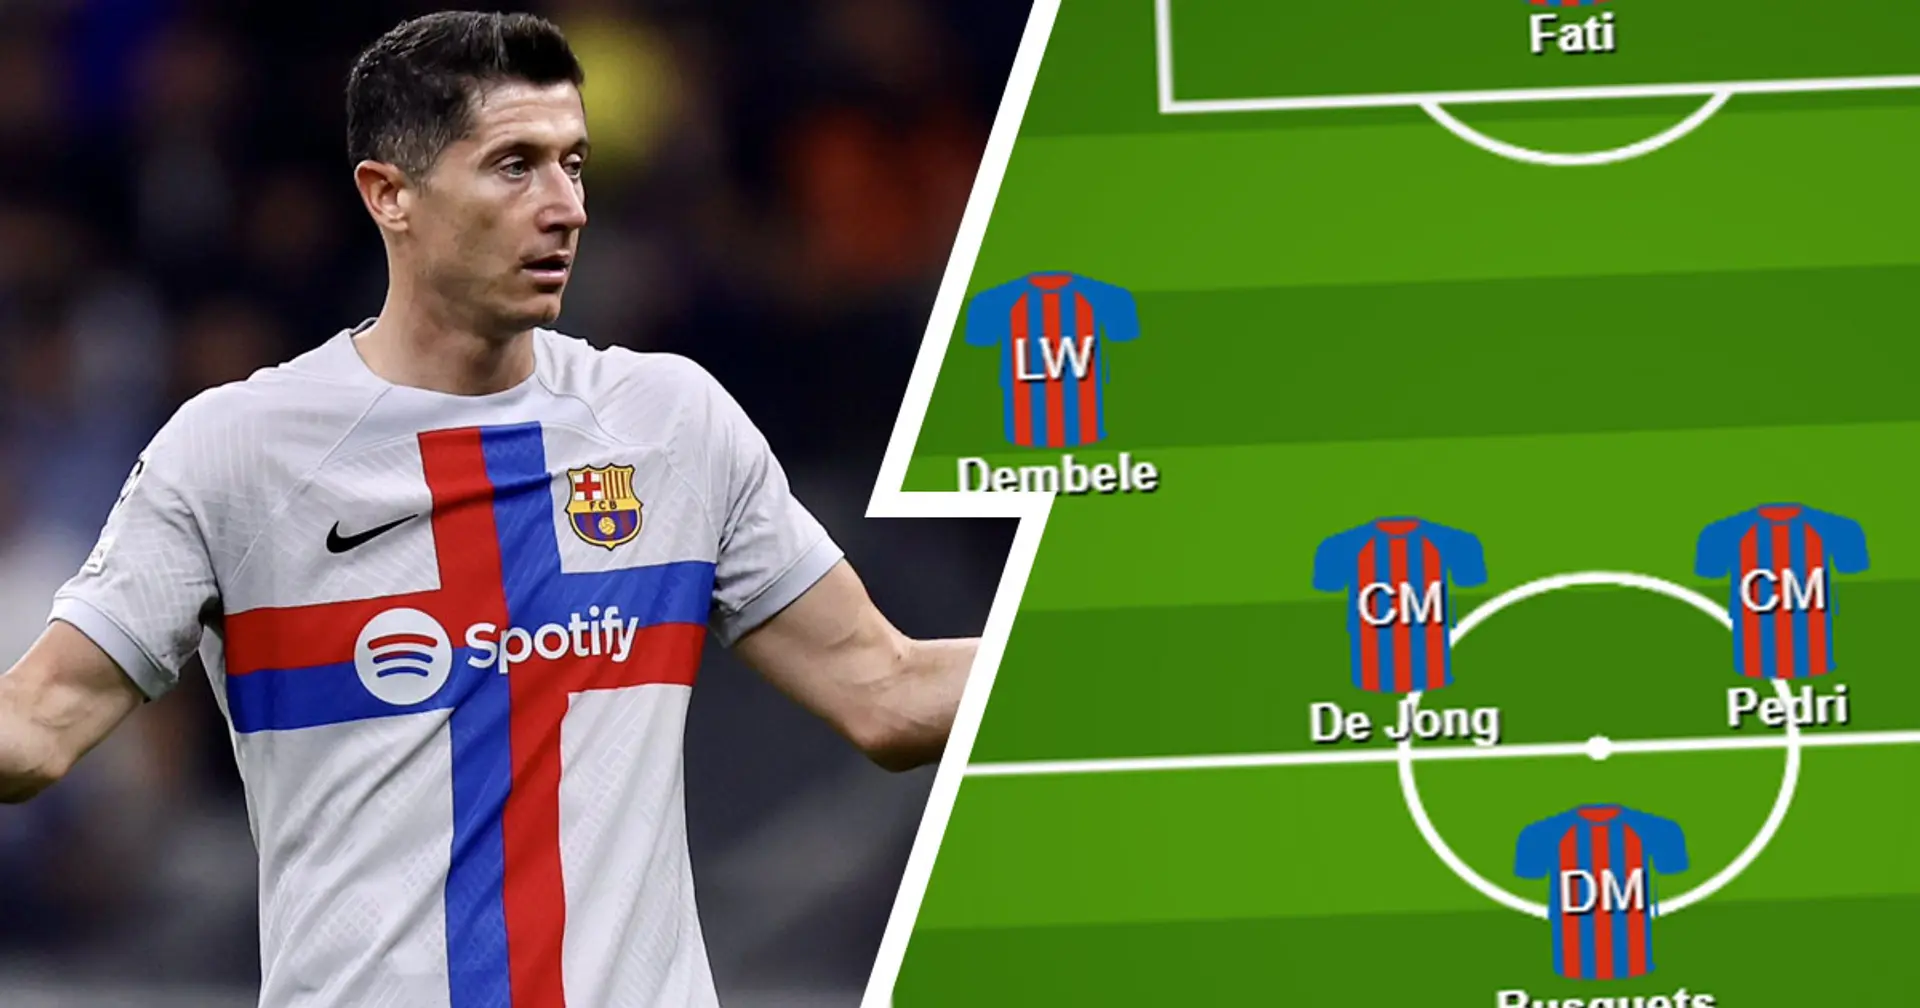 Lewandowski set to miss three games after World Cup break with suspension - 2 ways Barca can line-up without him